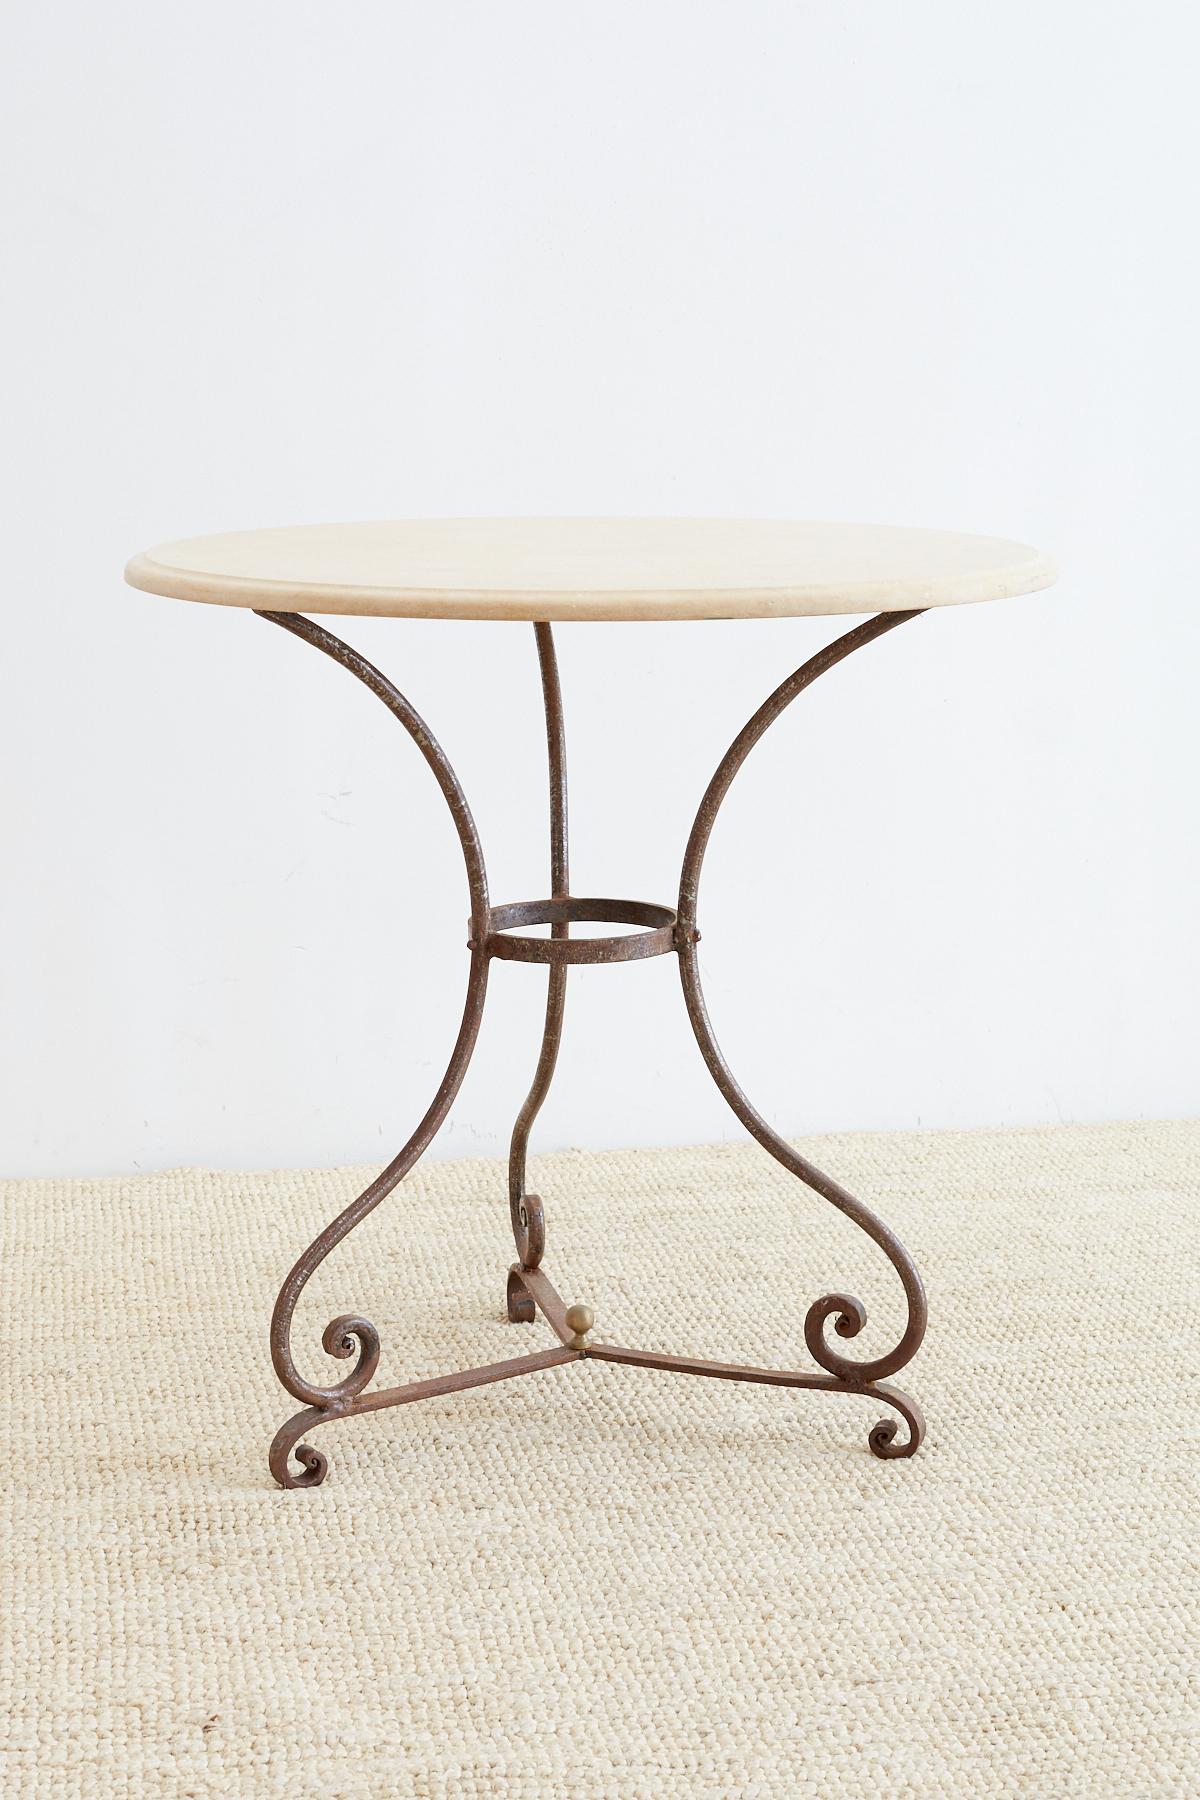 Hand-Crafted French Style Stone Top Bistro or Cafe Table